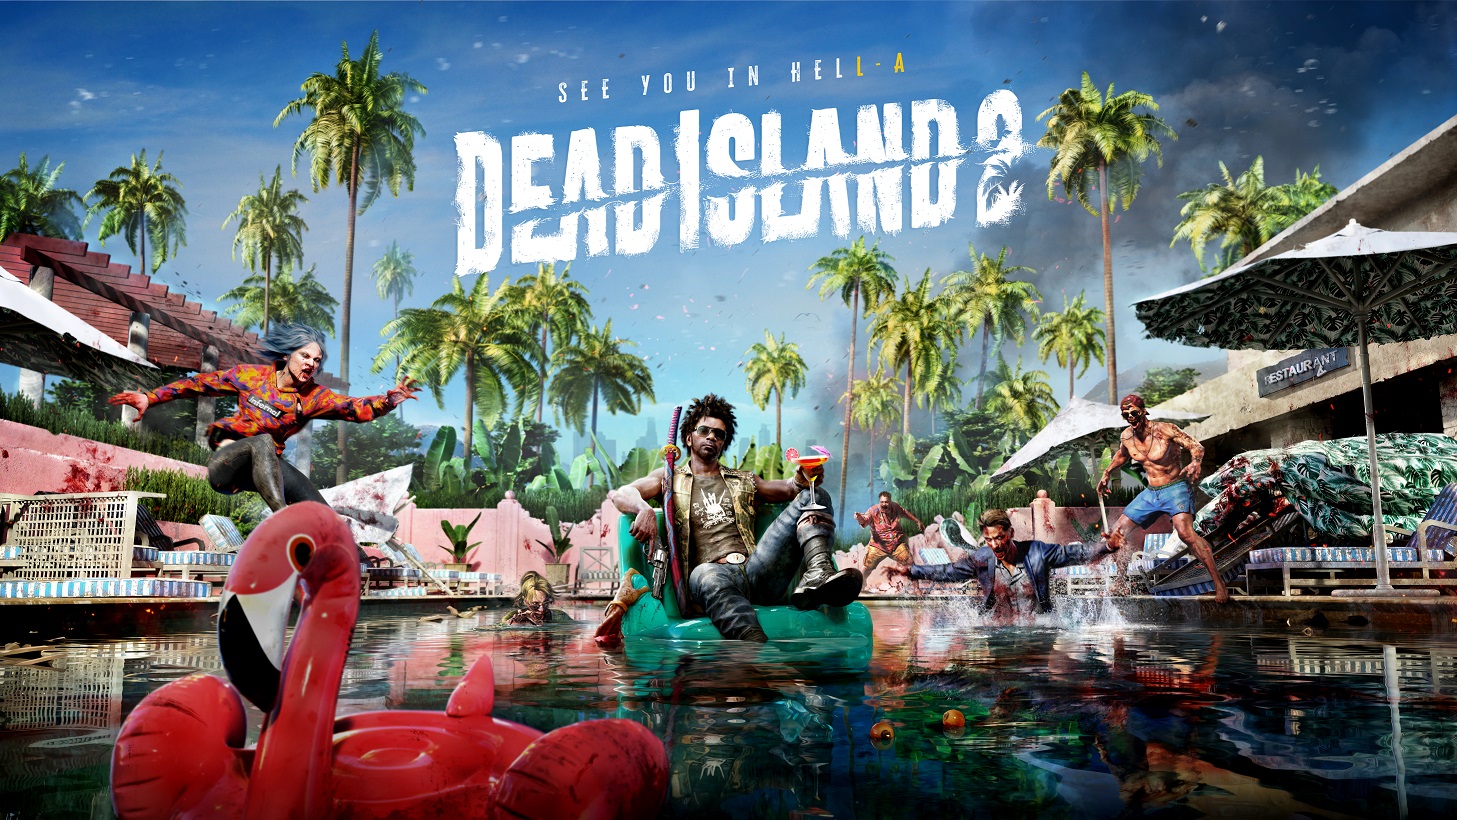 Take a look at the Dead Island 2 intro